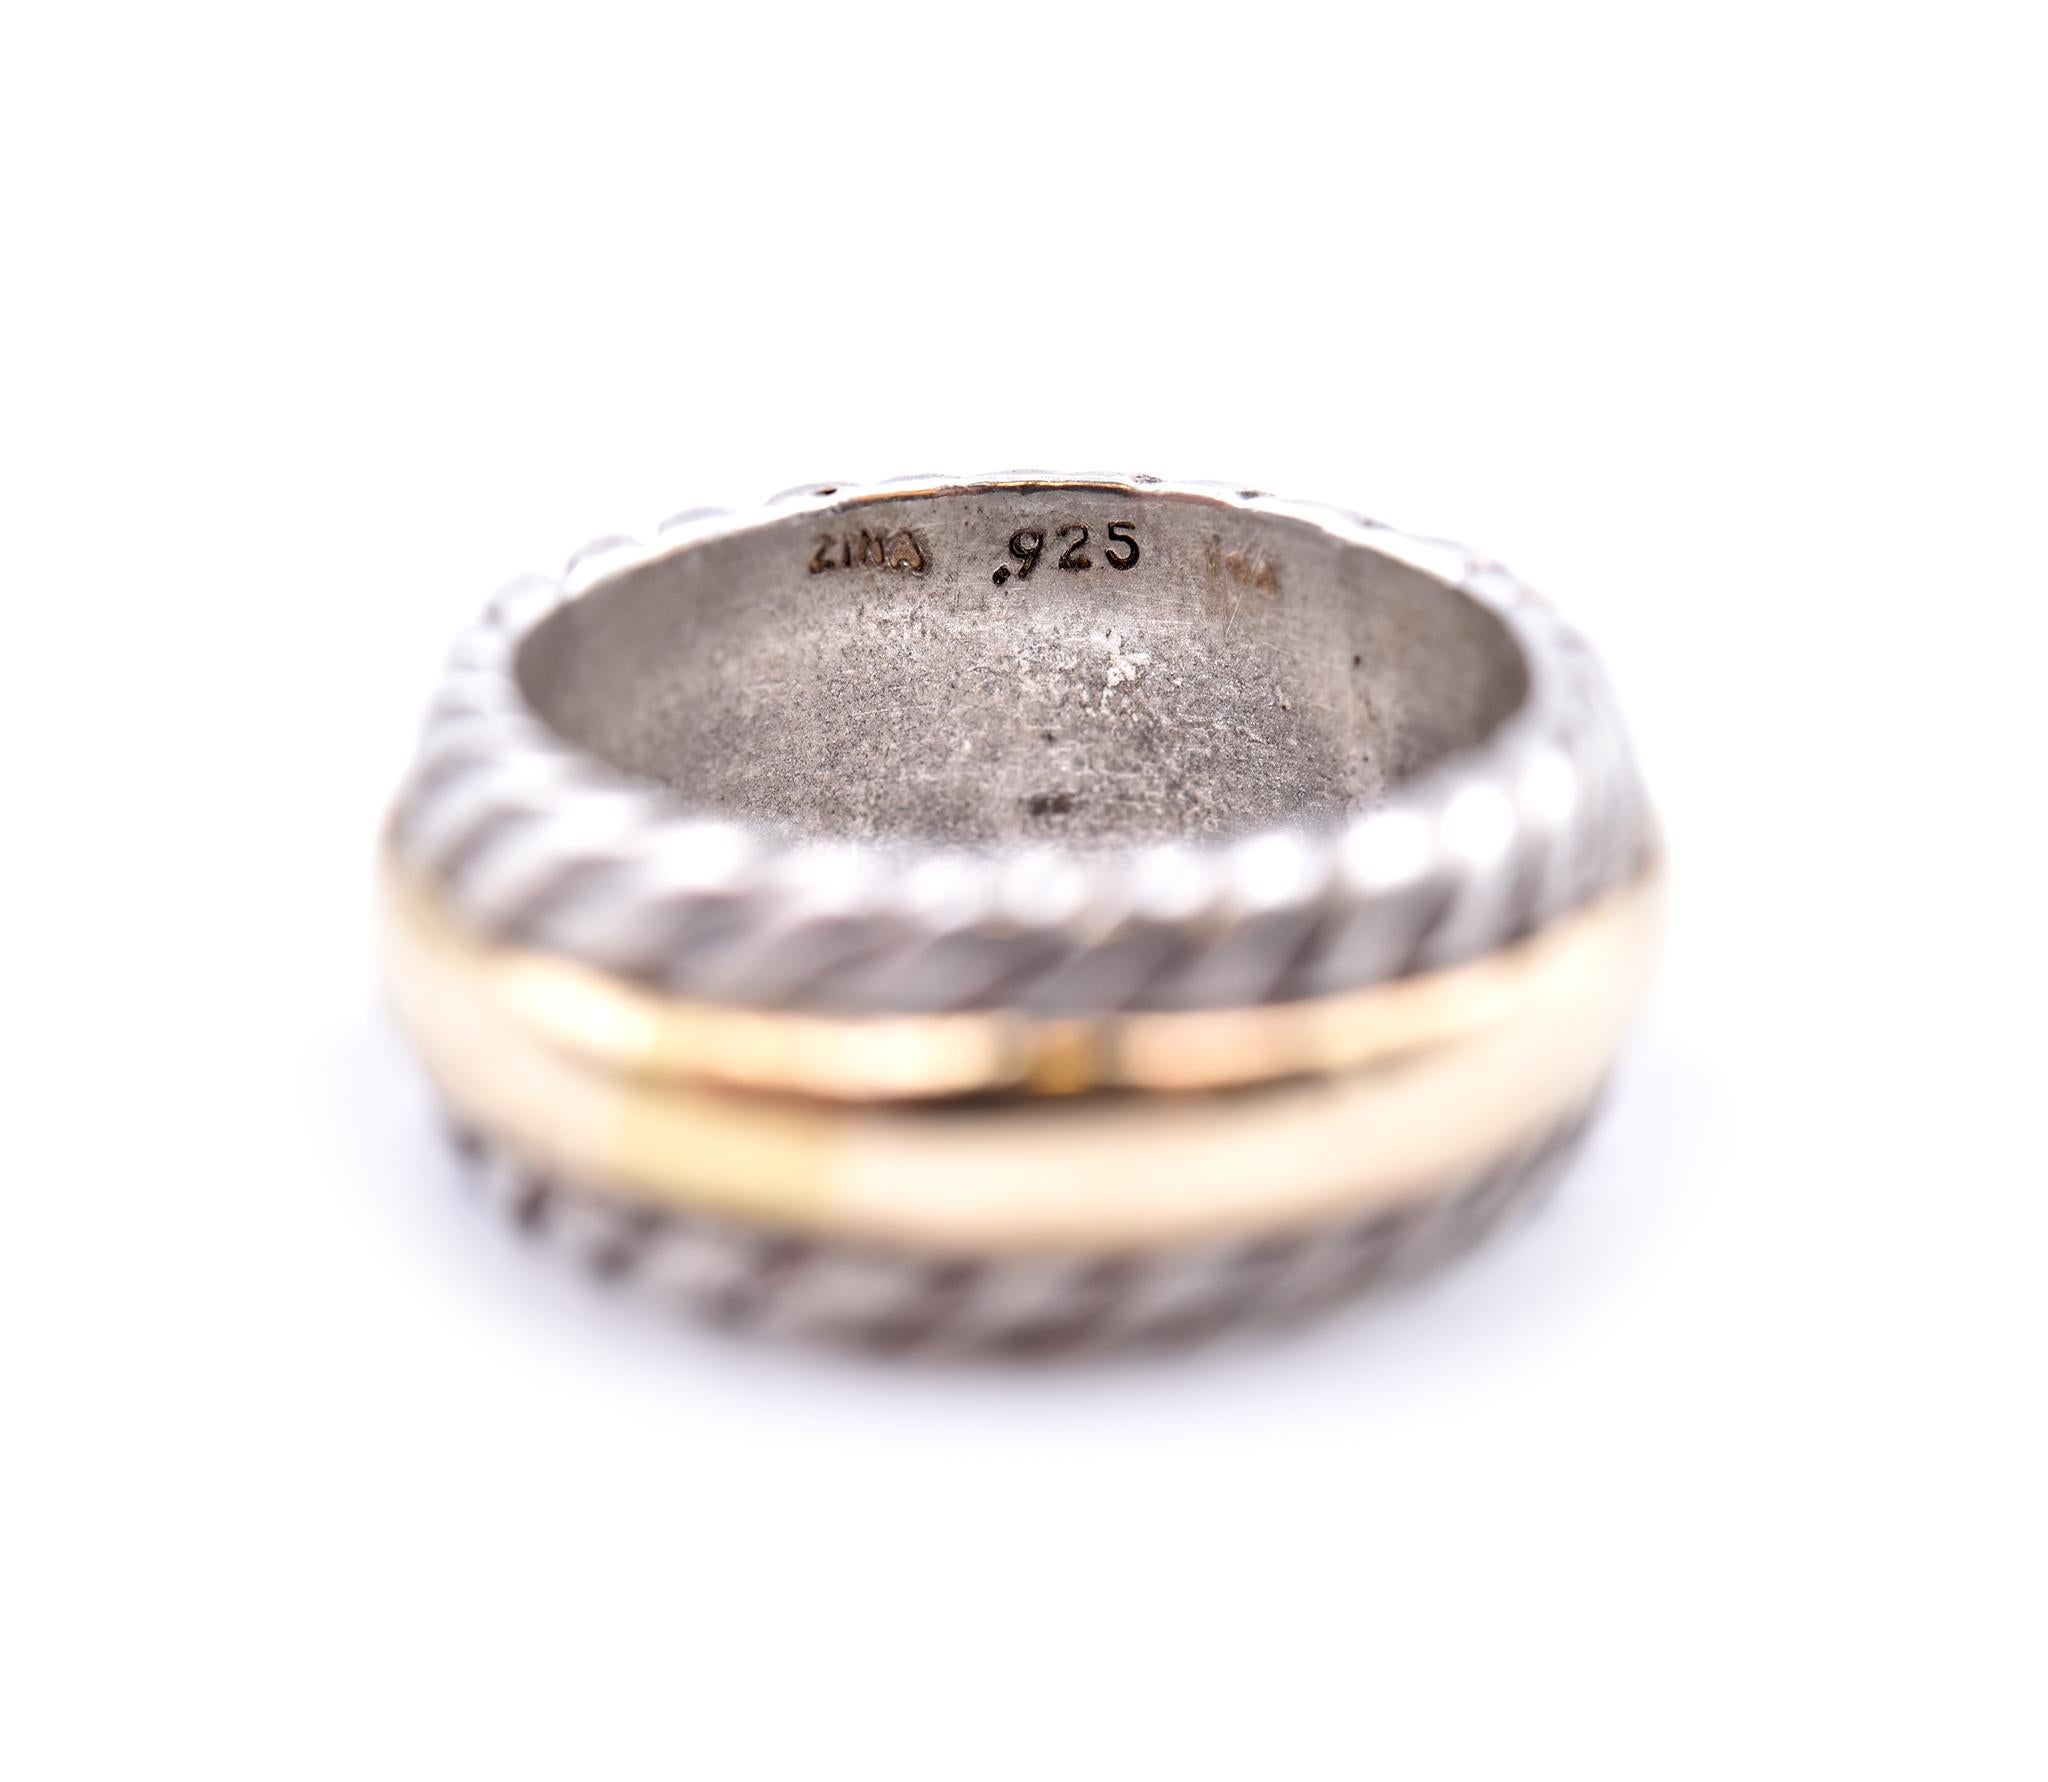 Designer: signed “Zima”
Material: sterling silver and 14k yellow gold
Ring Size: 7
Dimensions: ring is 8.55mm wide
Weight: 10.92 grams